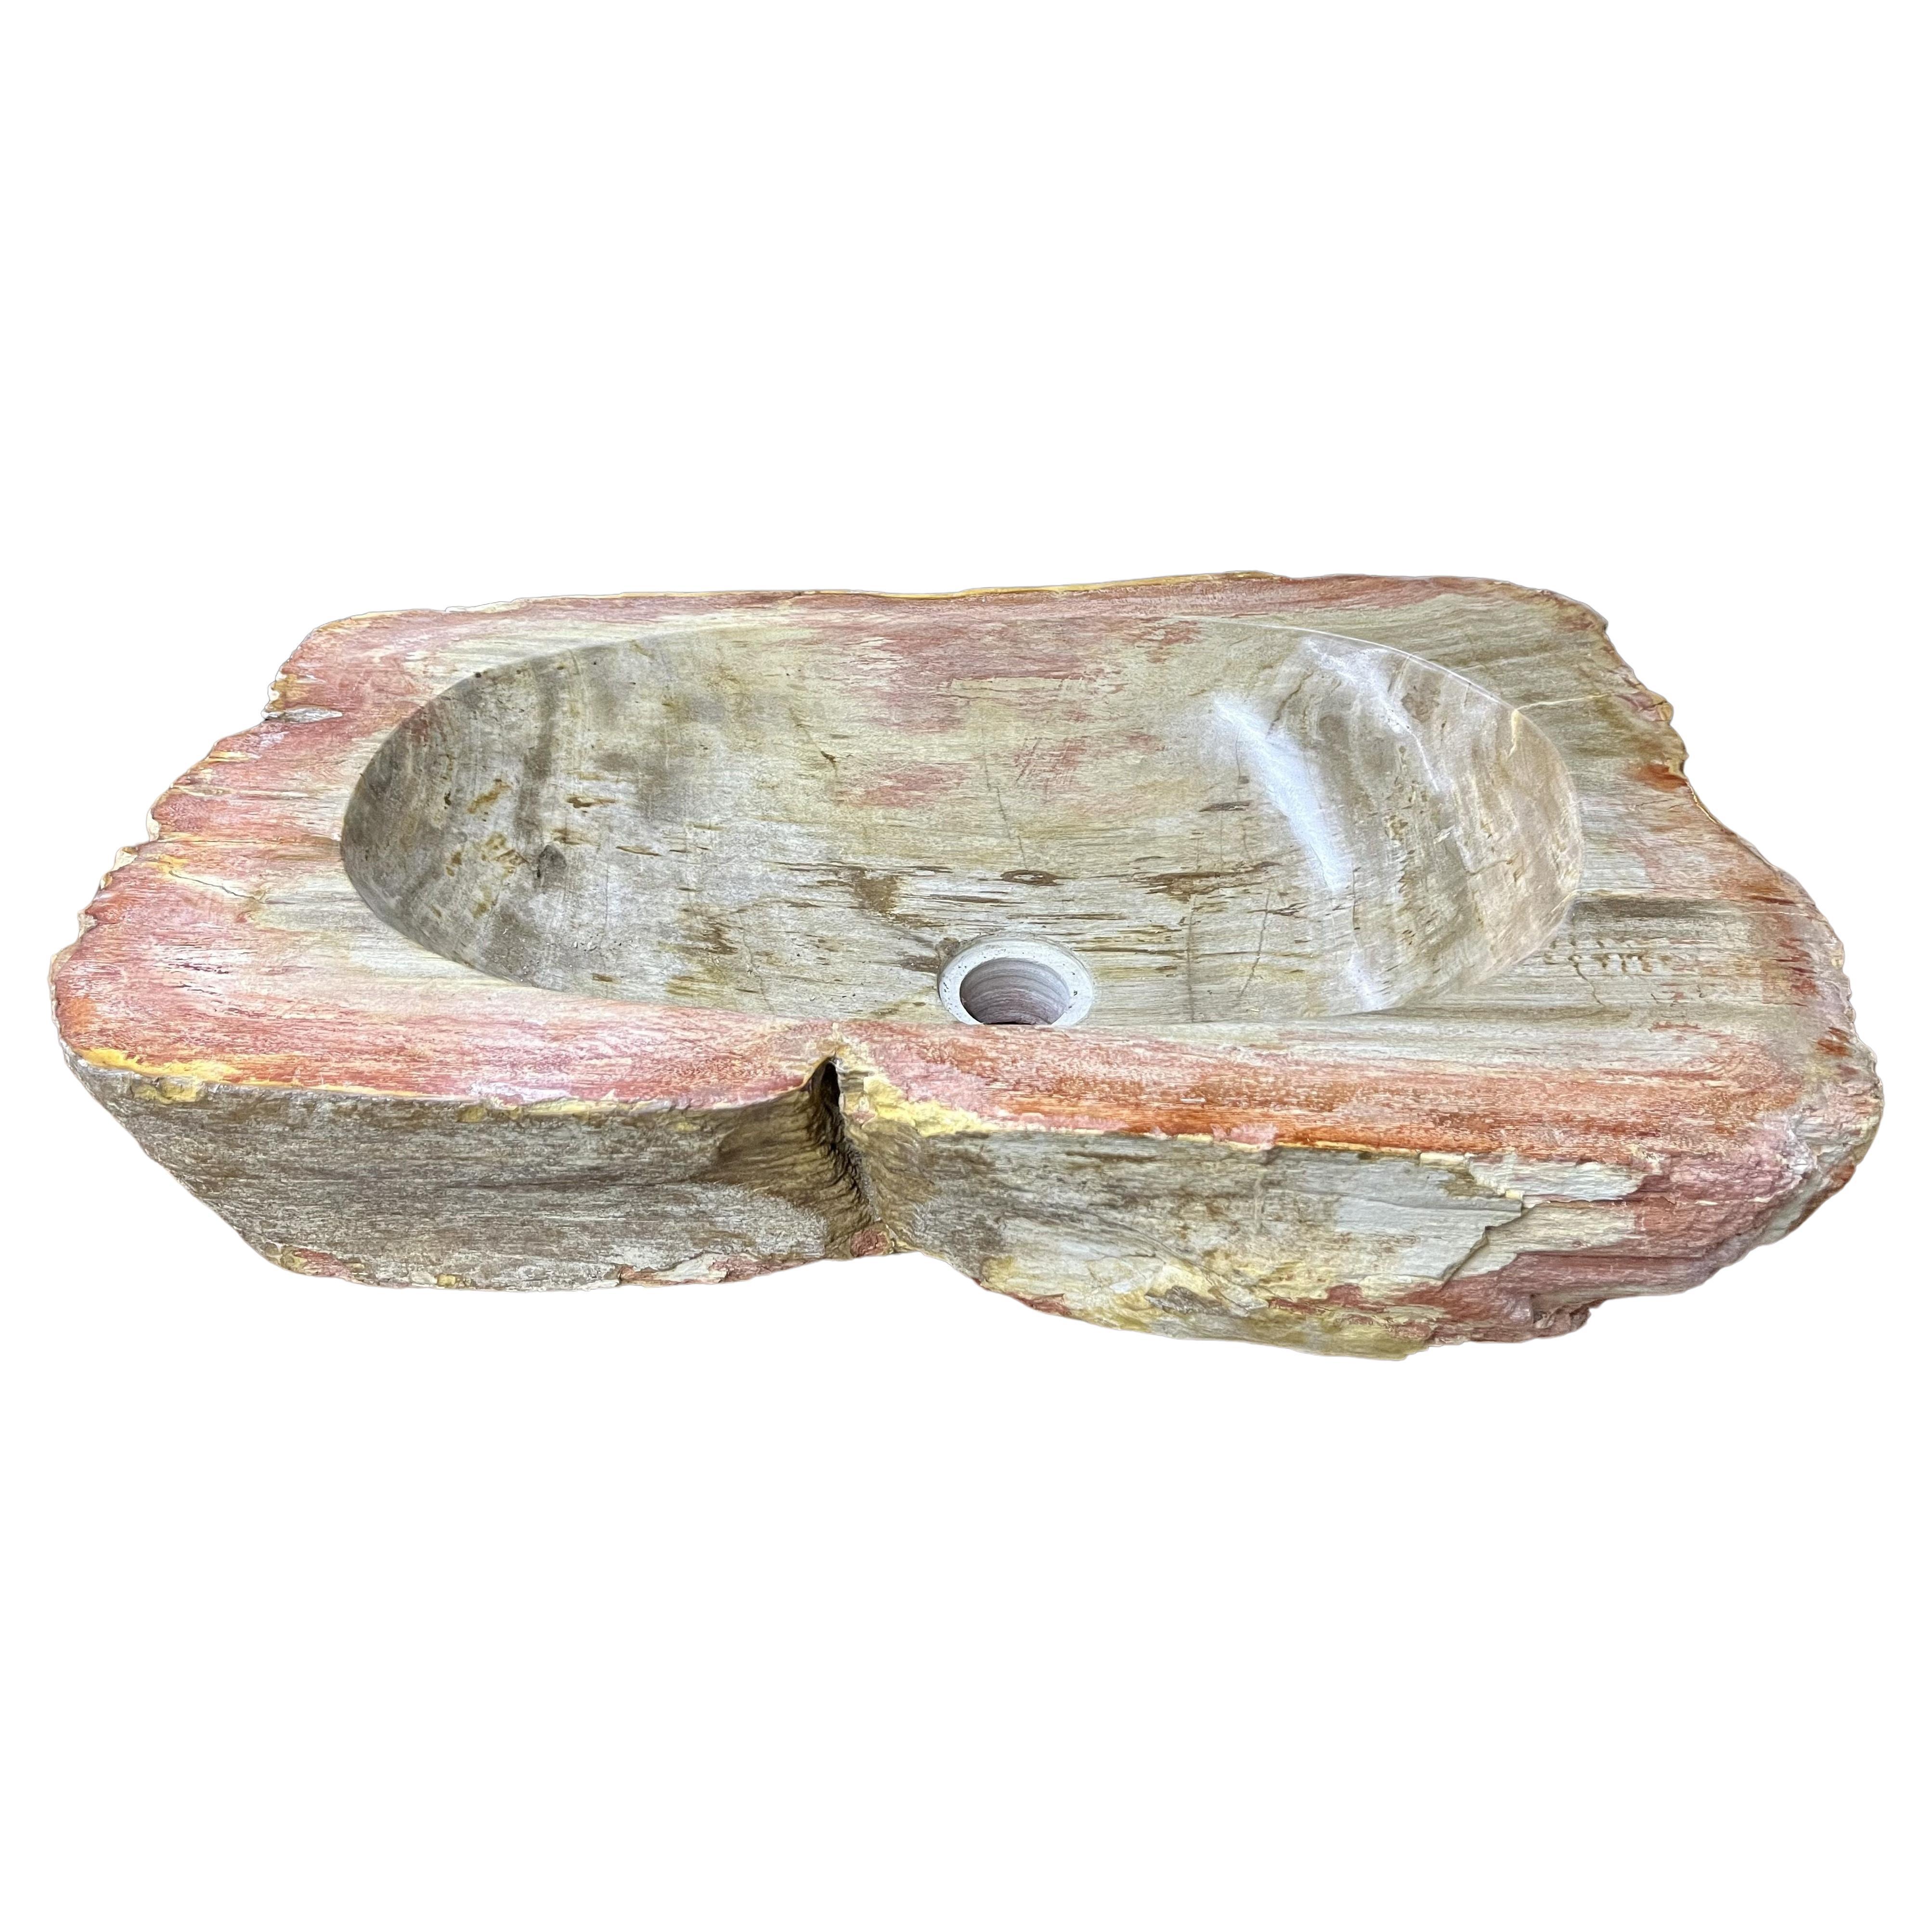 Petrified Wood Sink in Beige / Grey / Red / Yellow Tones, Organic Modern For Sale